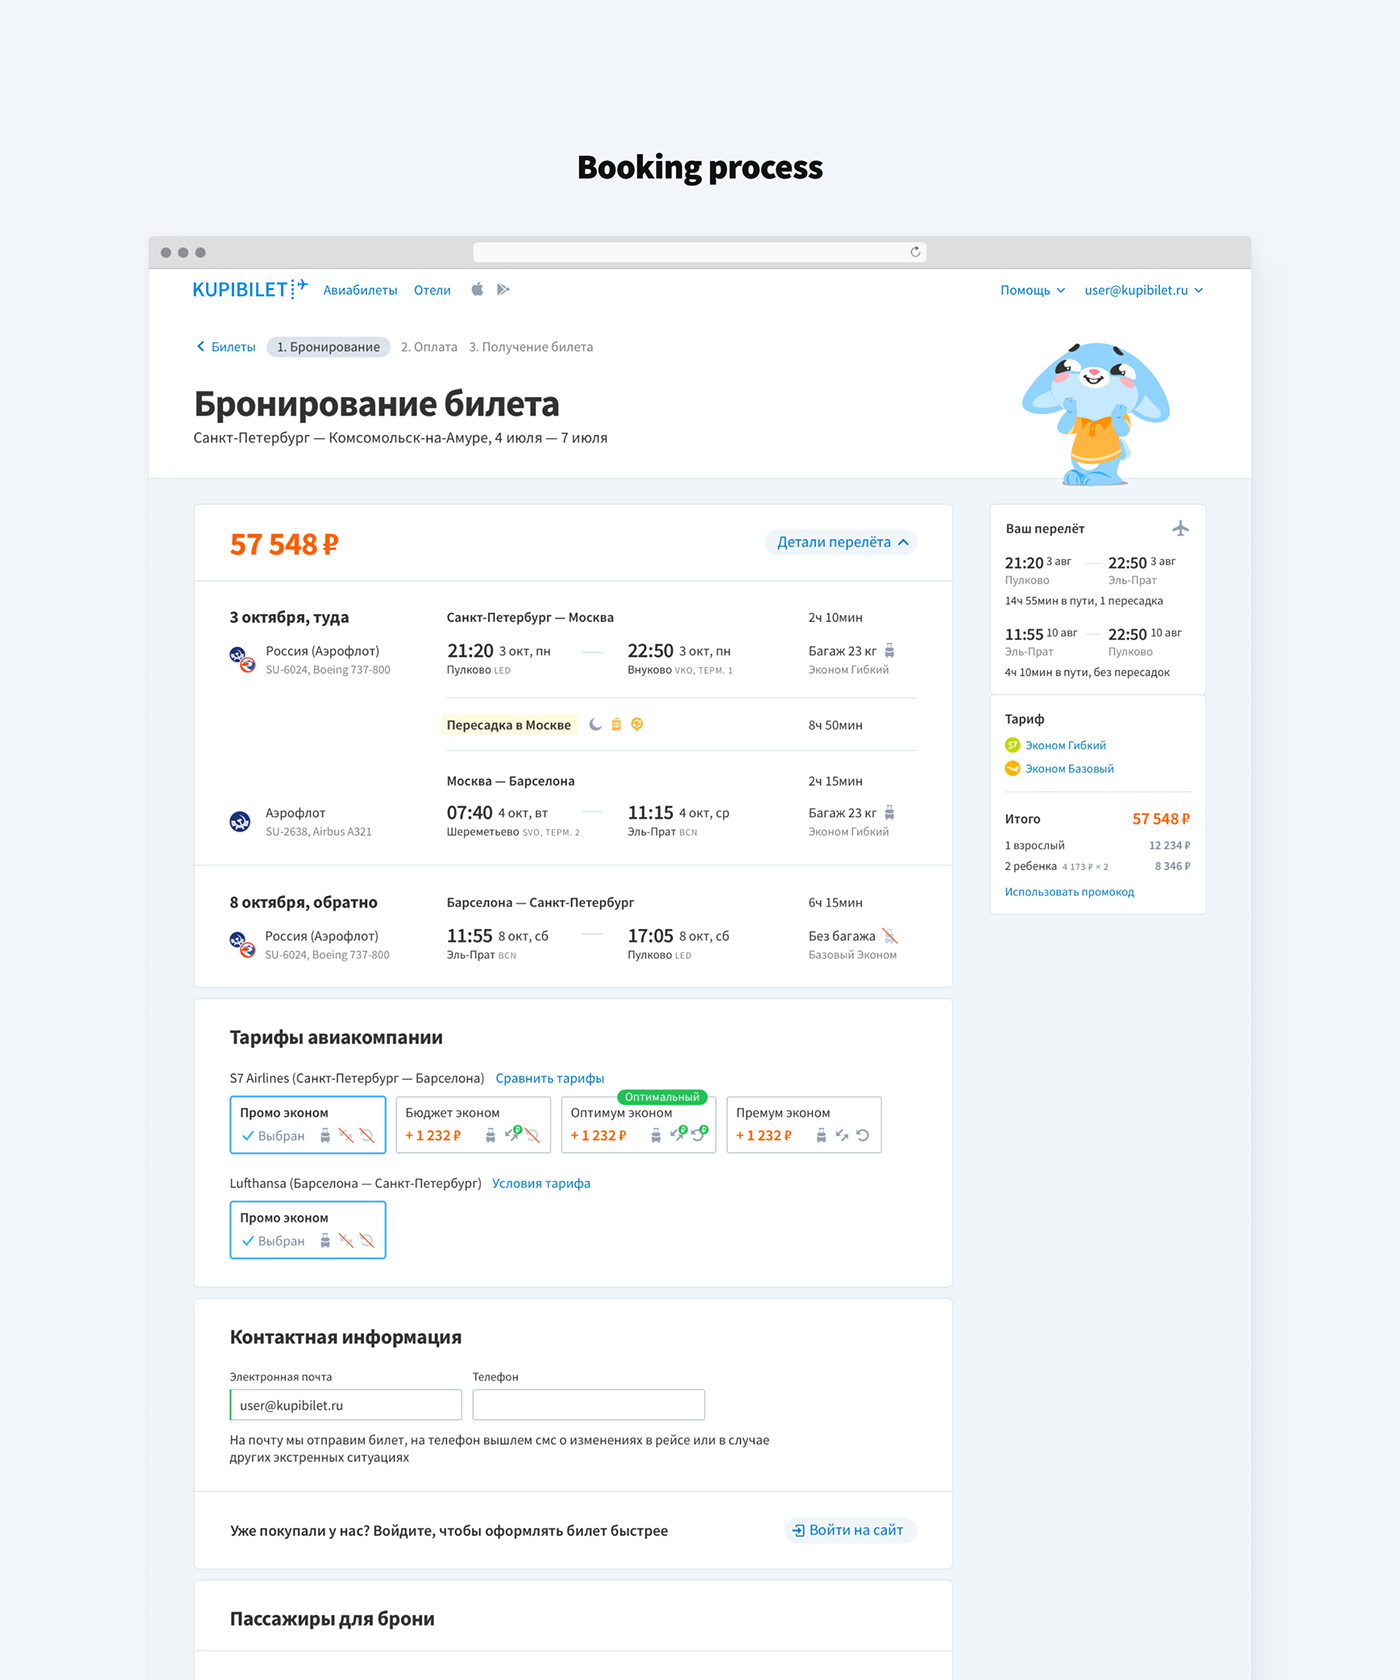 Travel tickets search Booking Flights Ticket Search Adaptive research UI/UX user interface